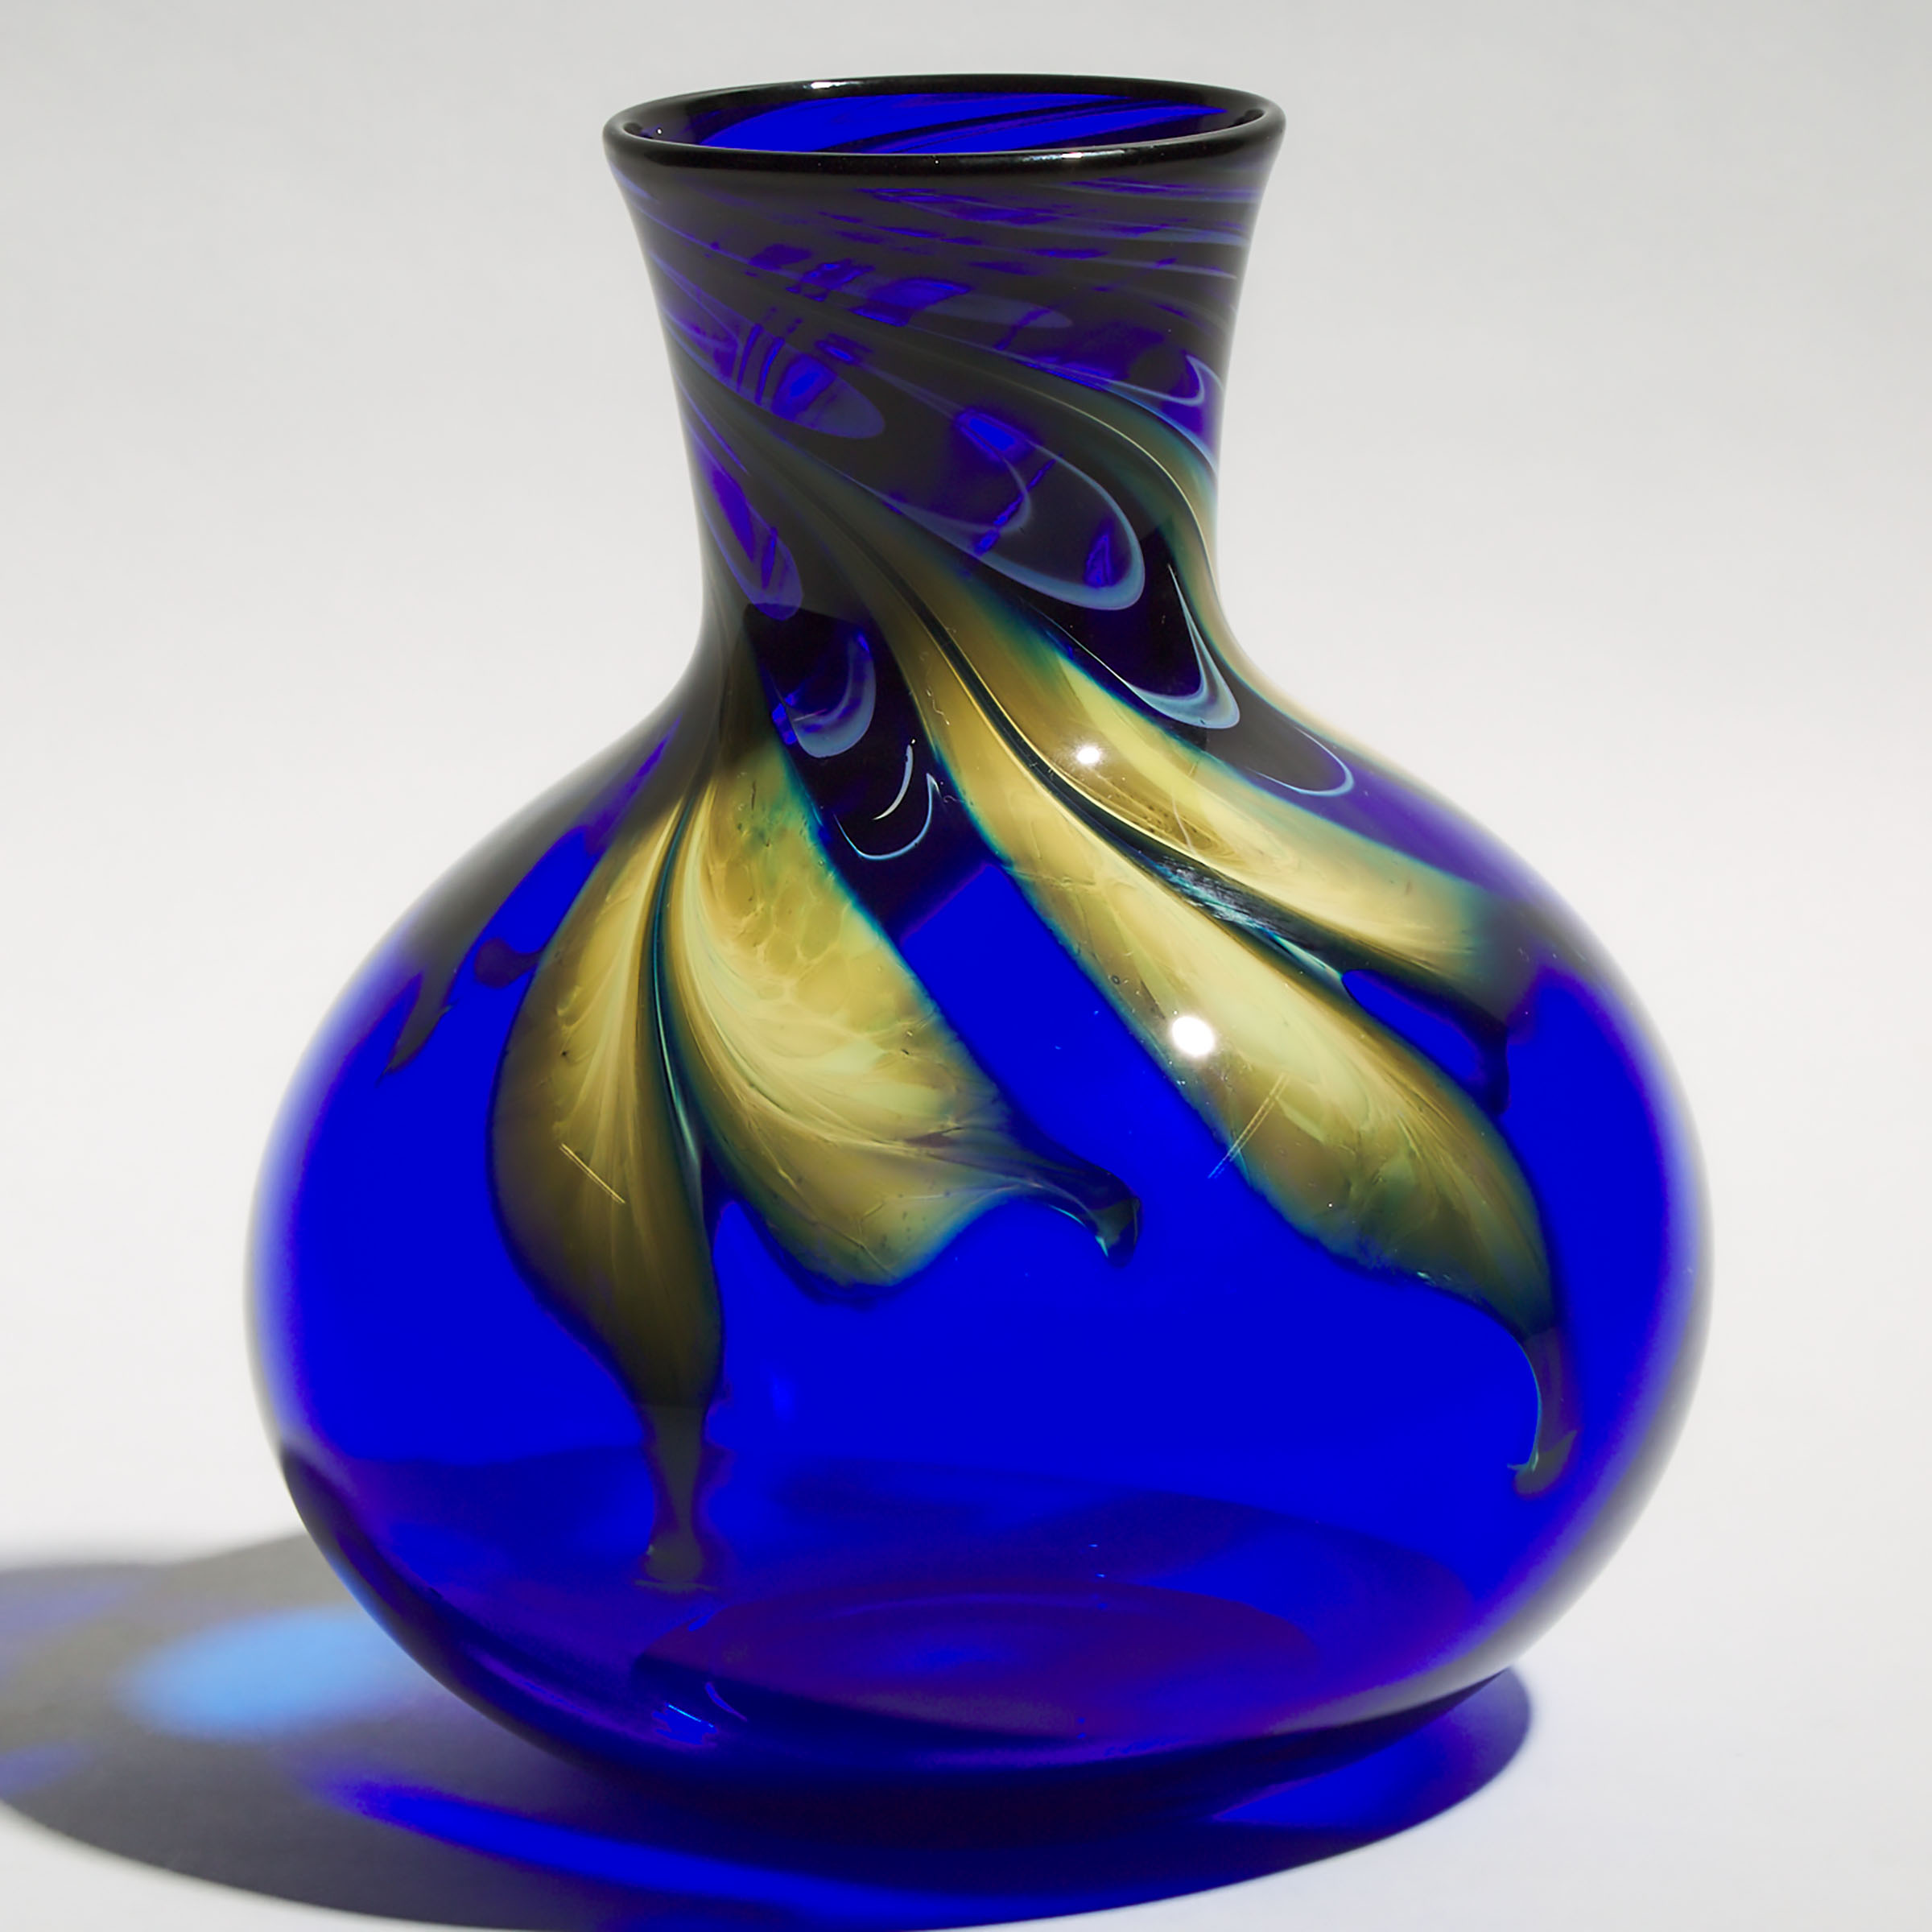 Charles Lotton (American, b.1935), Blue 'Peacock Feather' Glass Vase, dated 1991